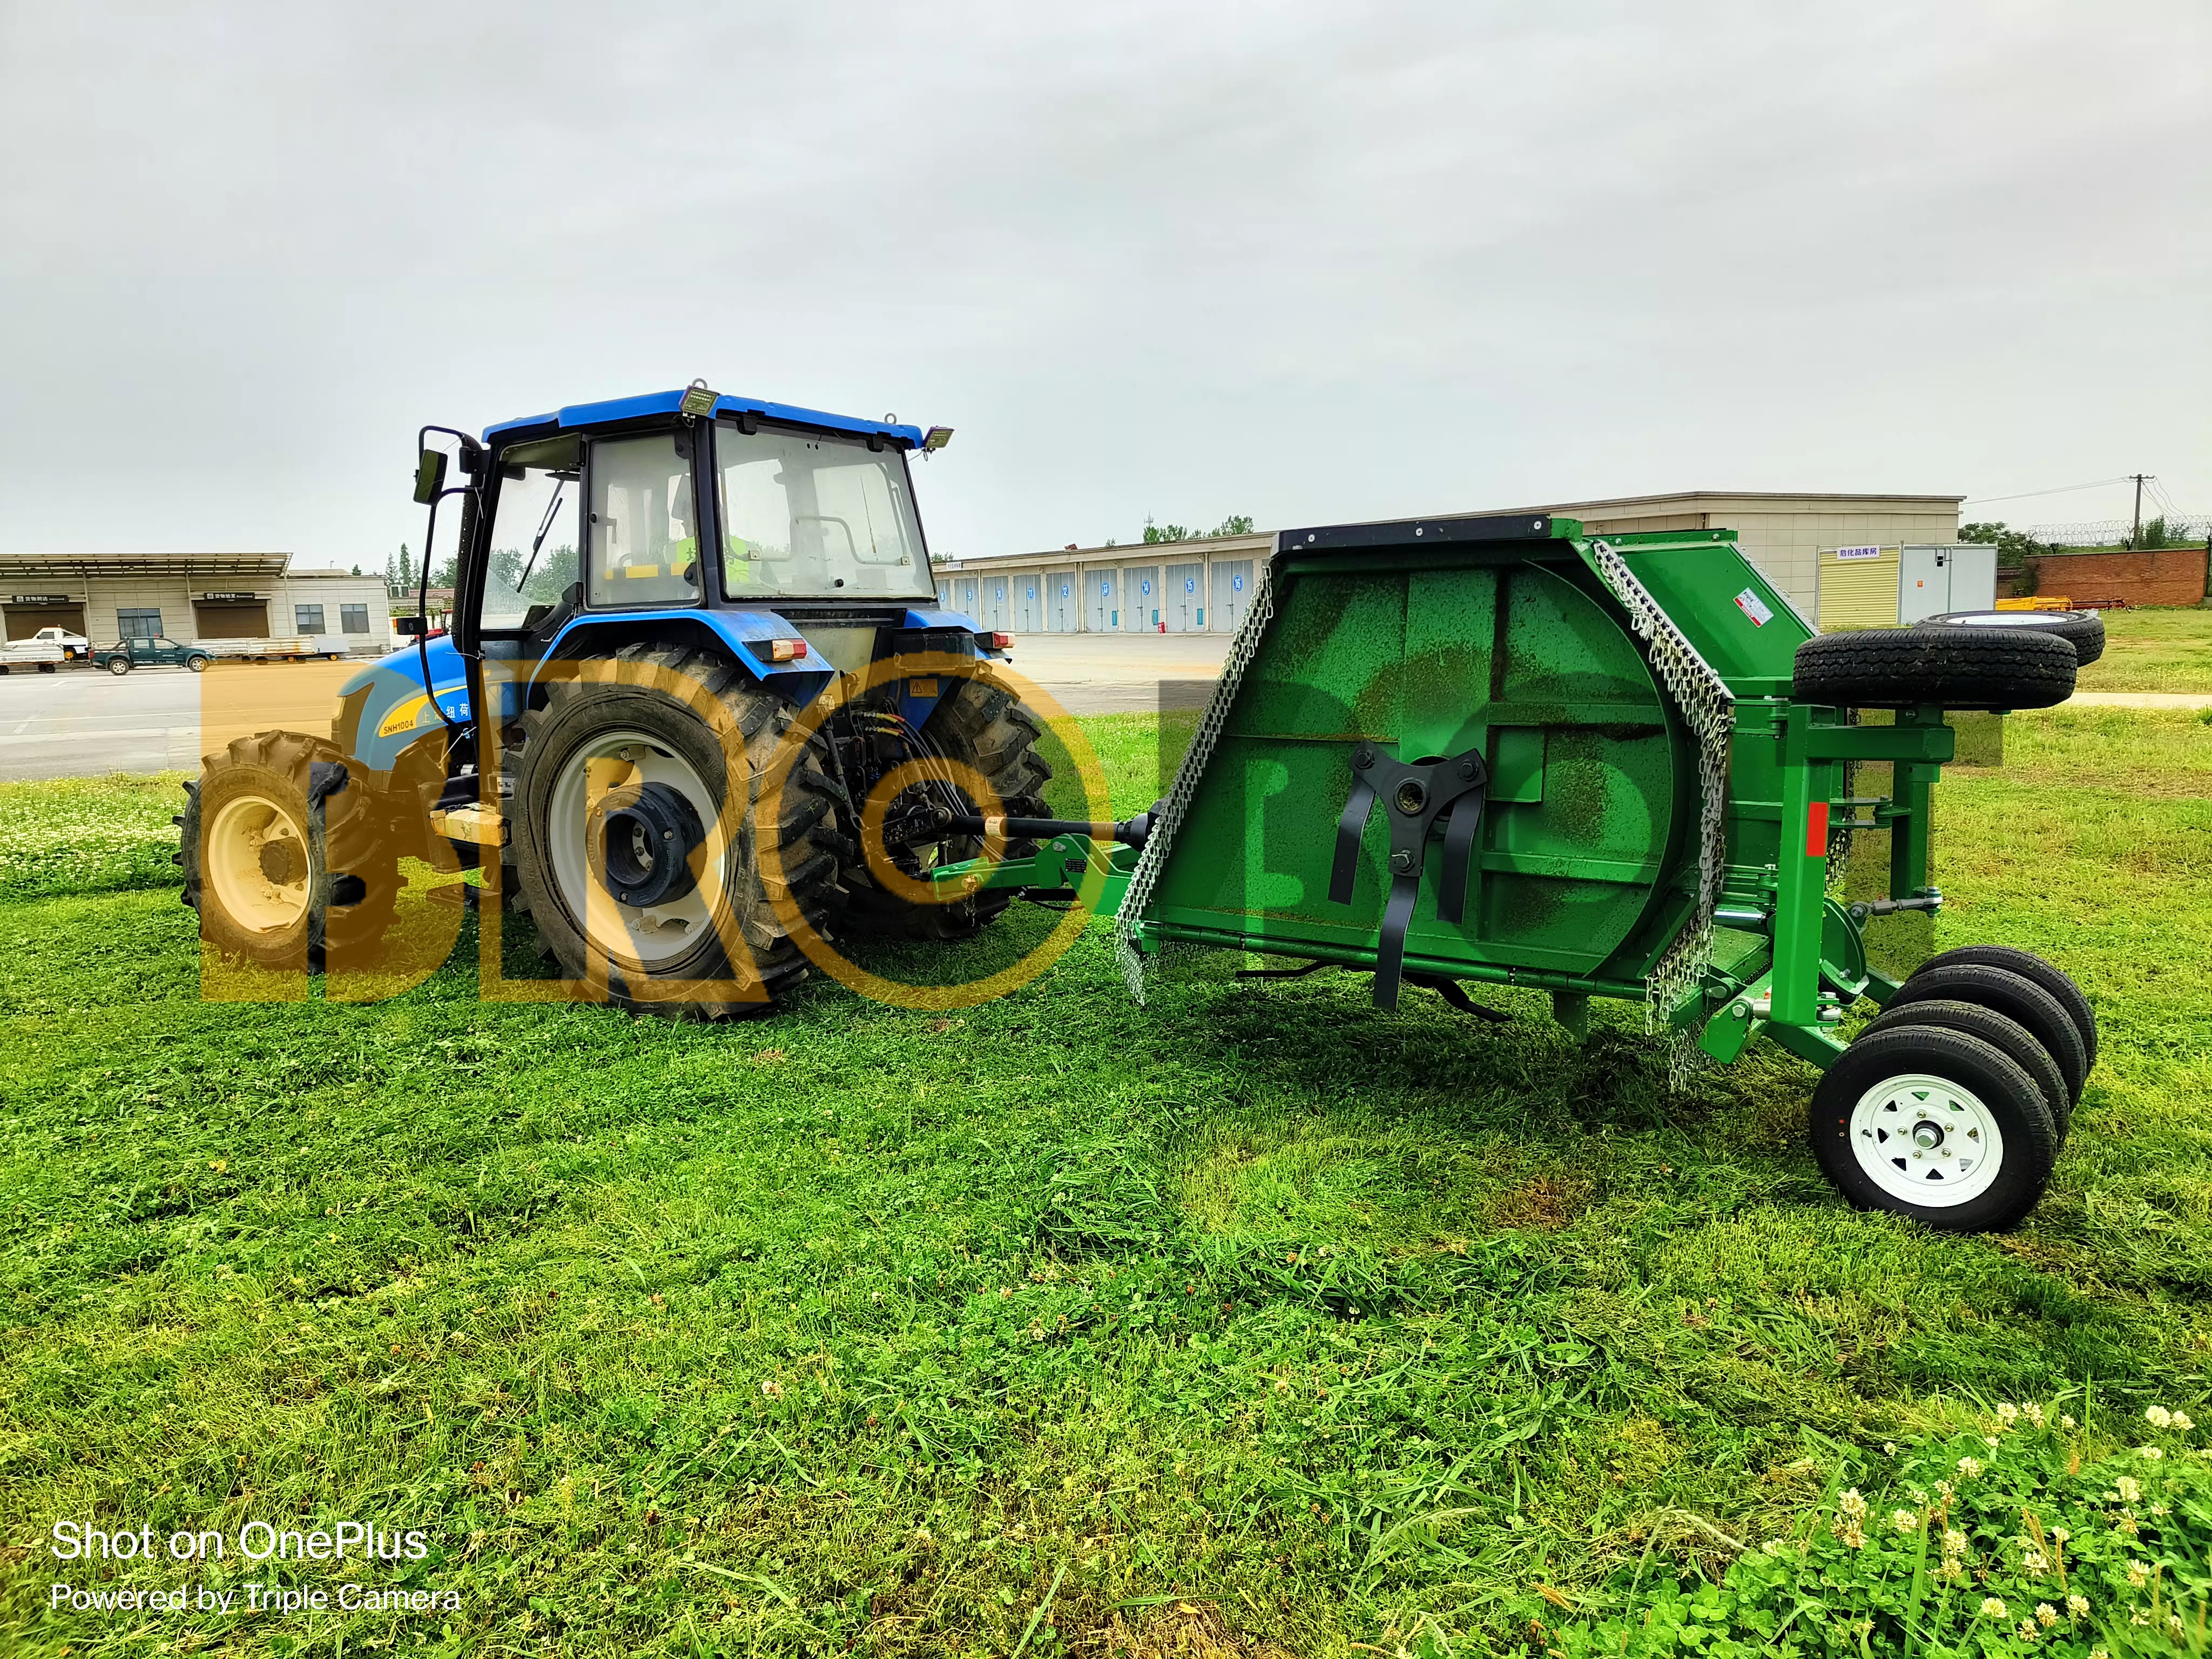 Why is the BROBOT rotary cutter mower favored by many customers?